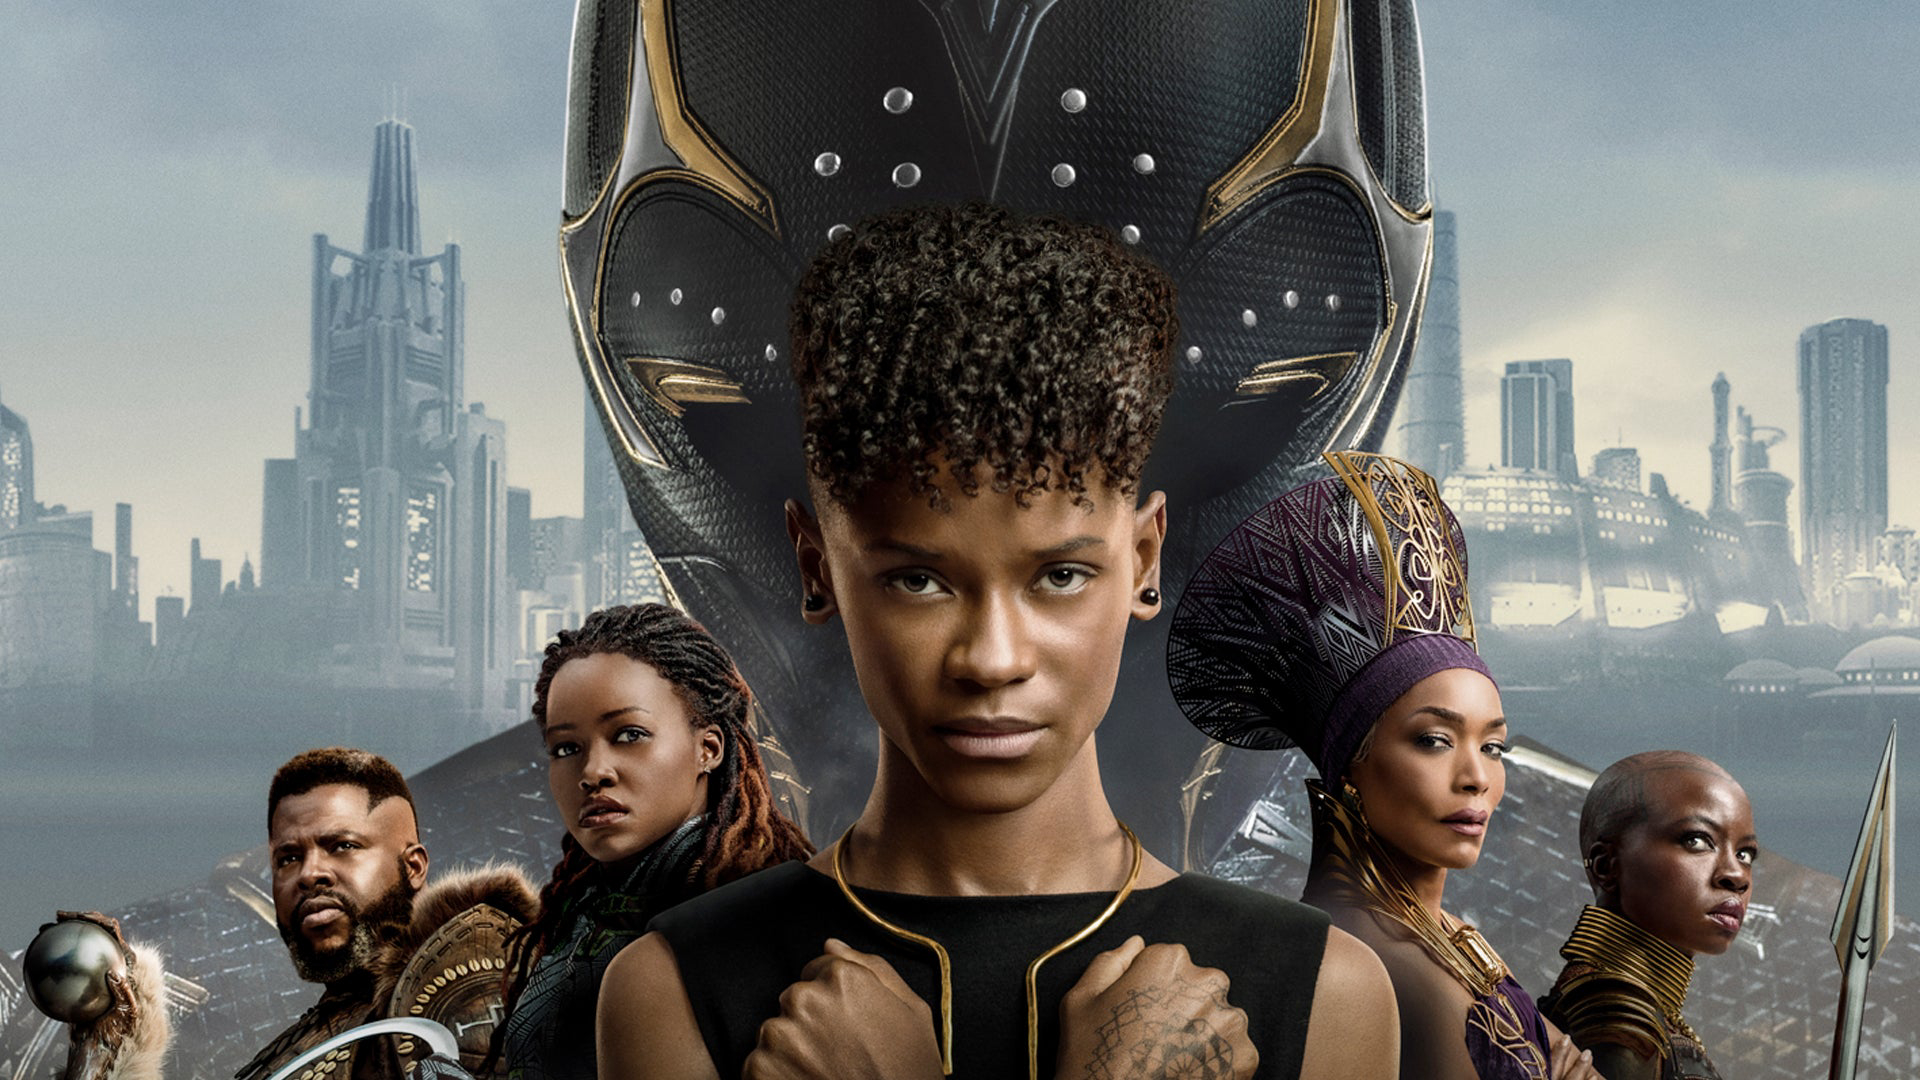 Read more about the article French Defence Ministry Condemns Black Panther Movie: ‘Unacceptable’ Resemblance of French Troops | The African Exponent.